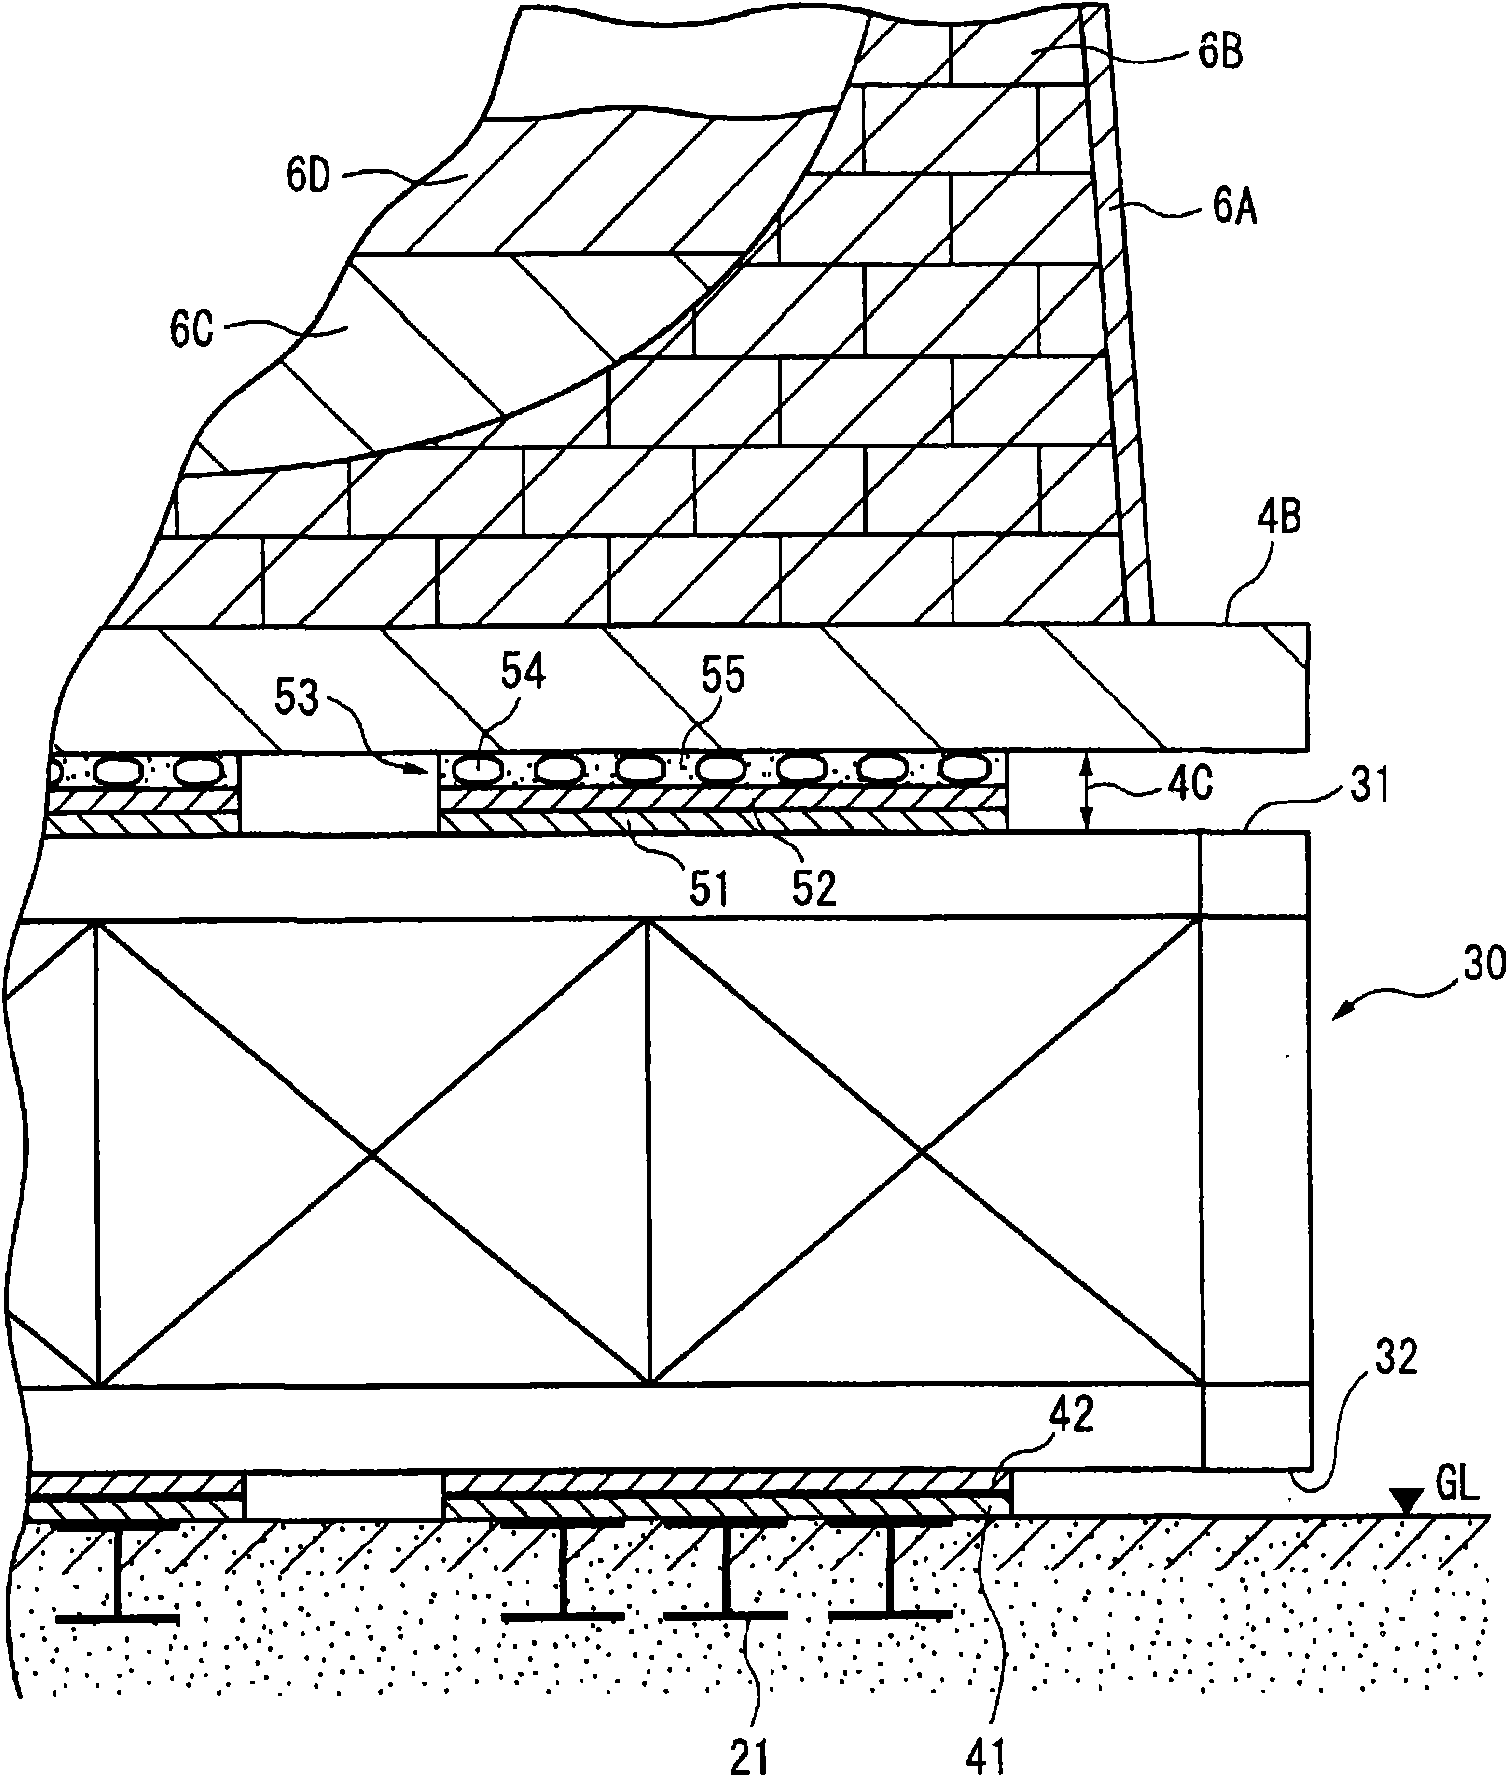 Ring block conveying apparatus, and remedy method for blast furnace casing